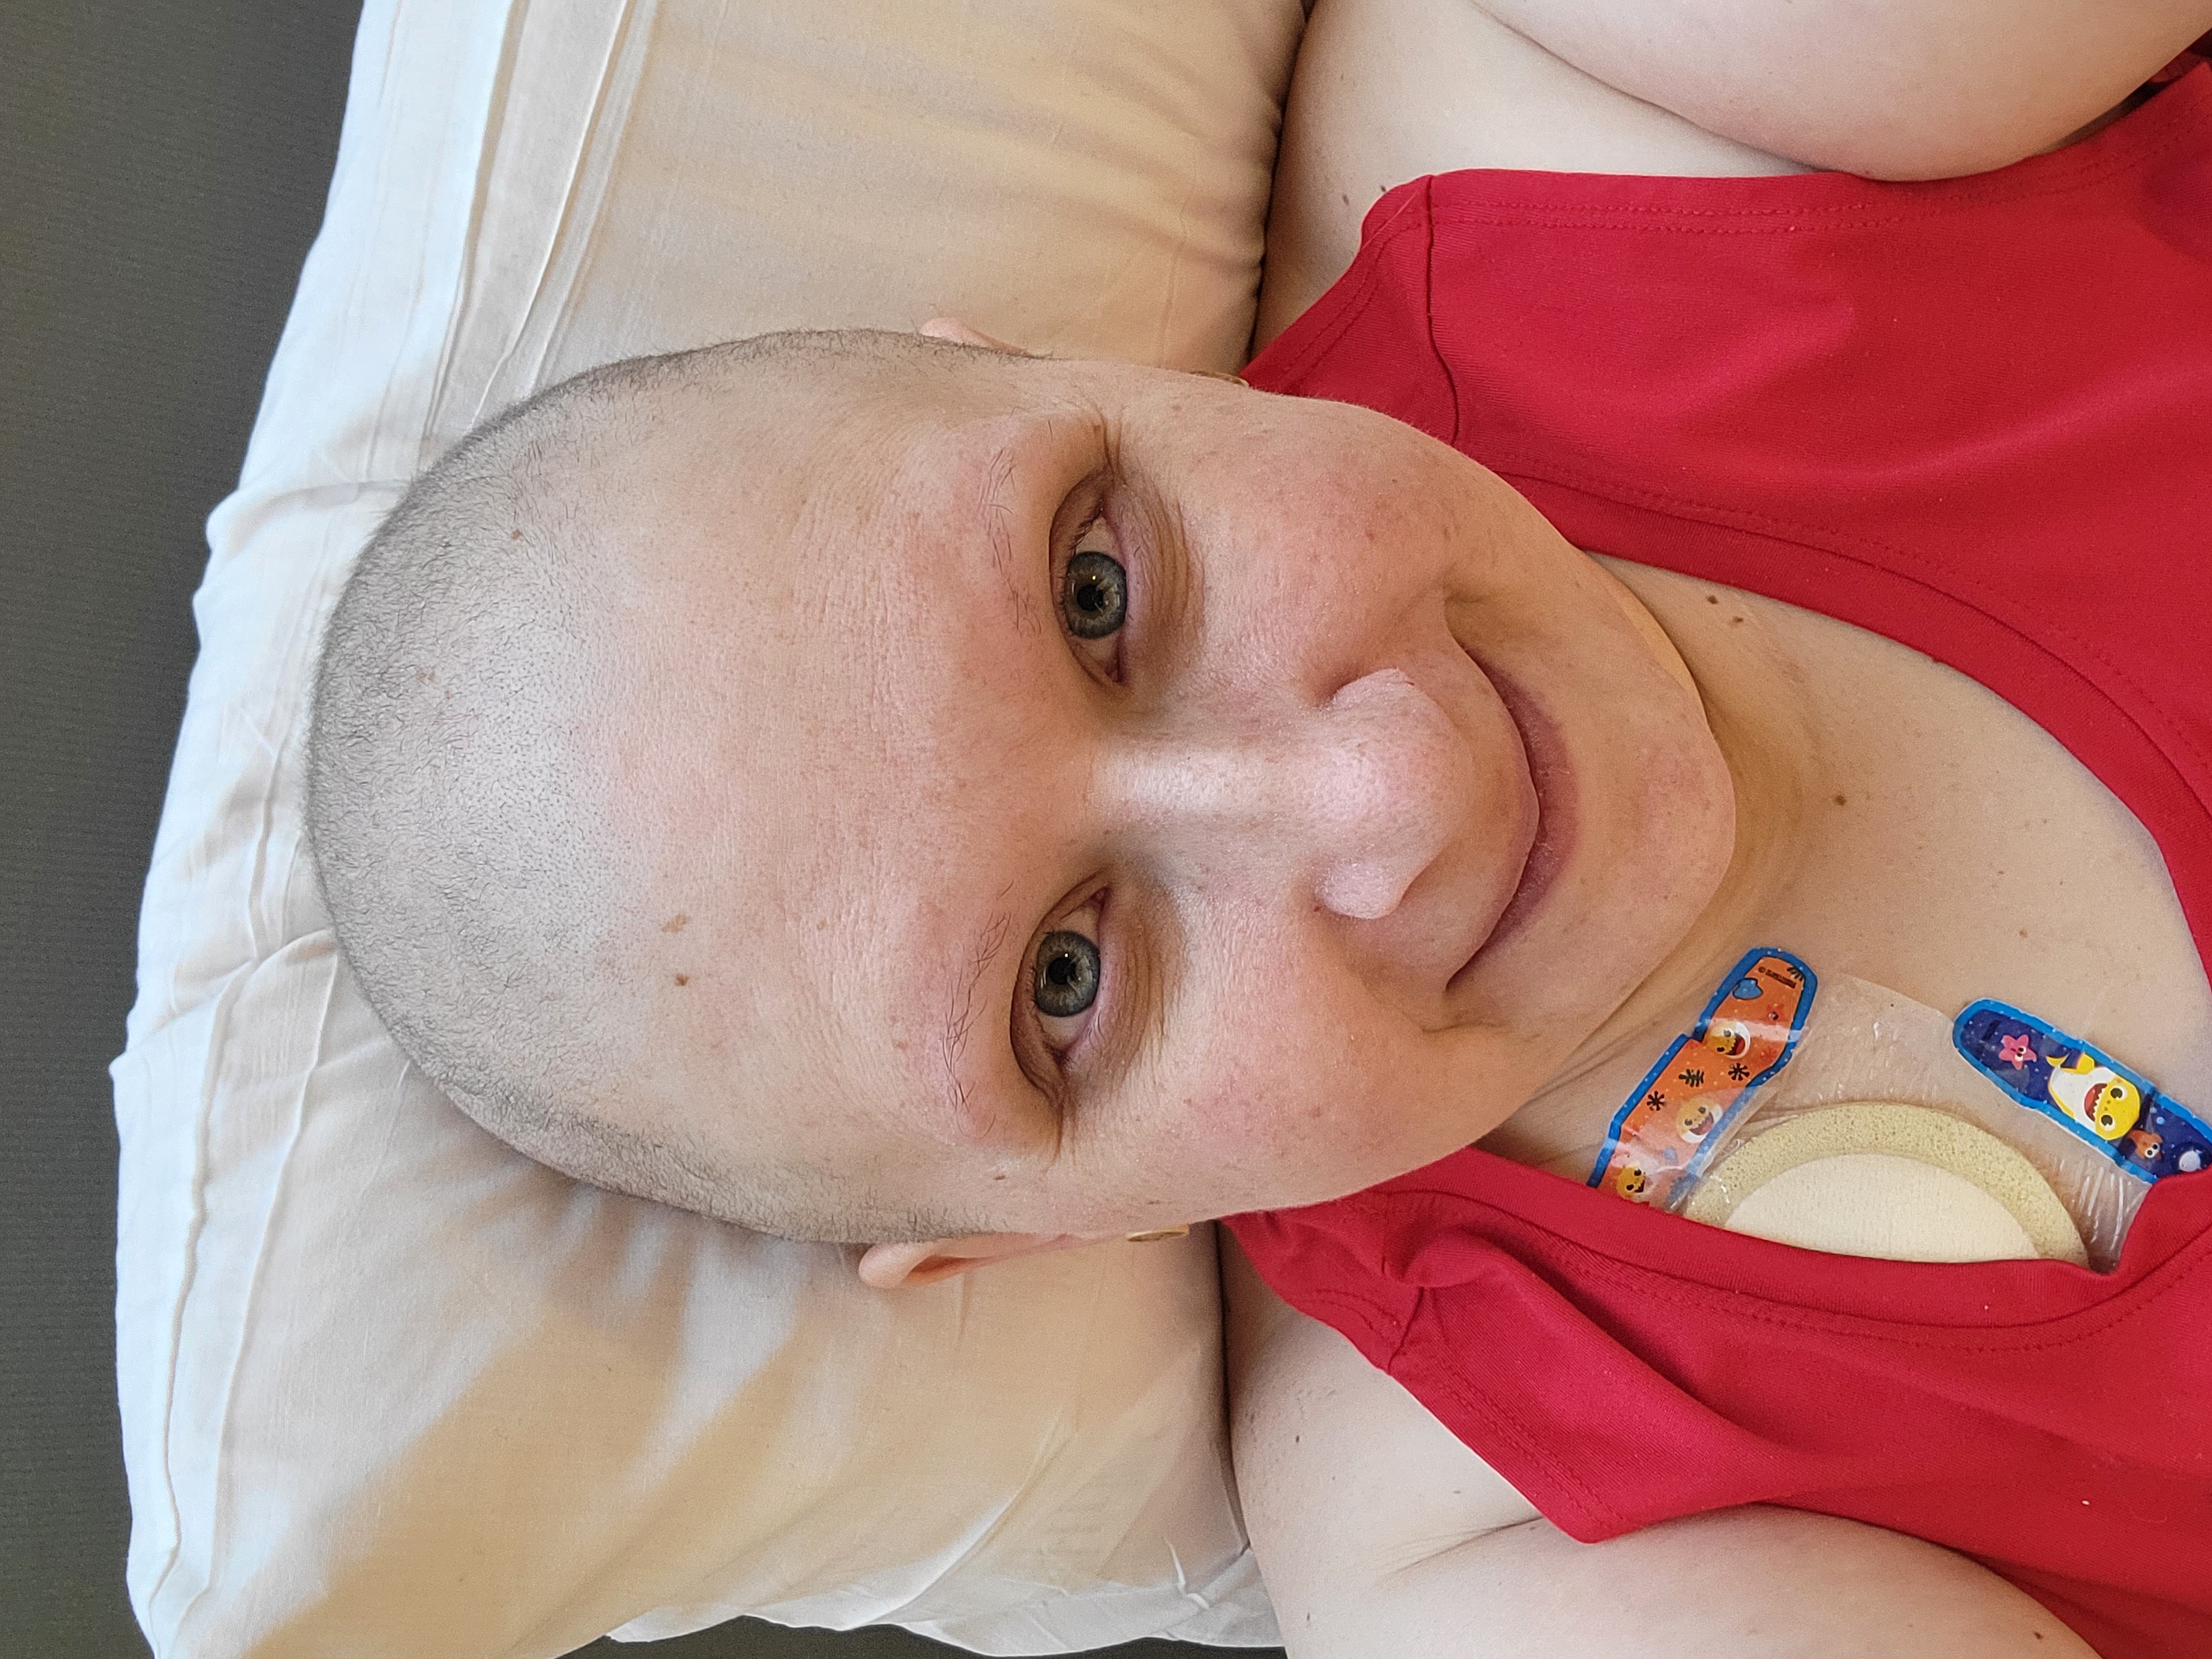 A bald woman with no eyebrows in a red tank top with bandages showing near her shoulder.